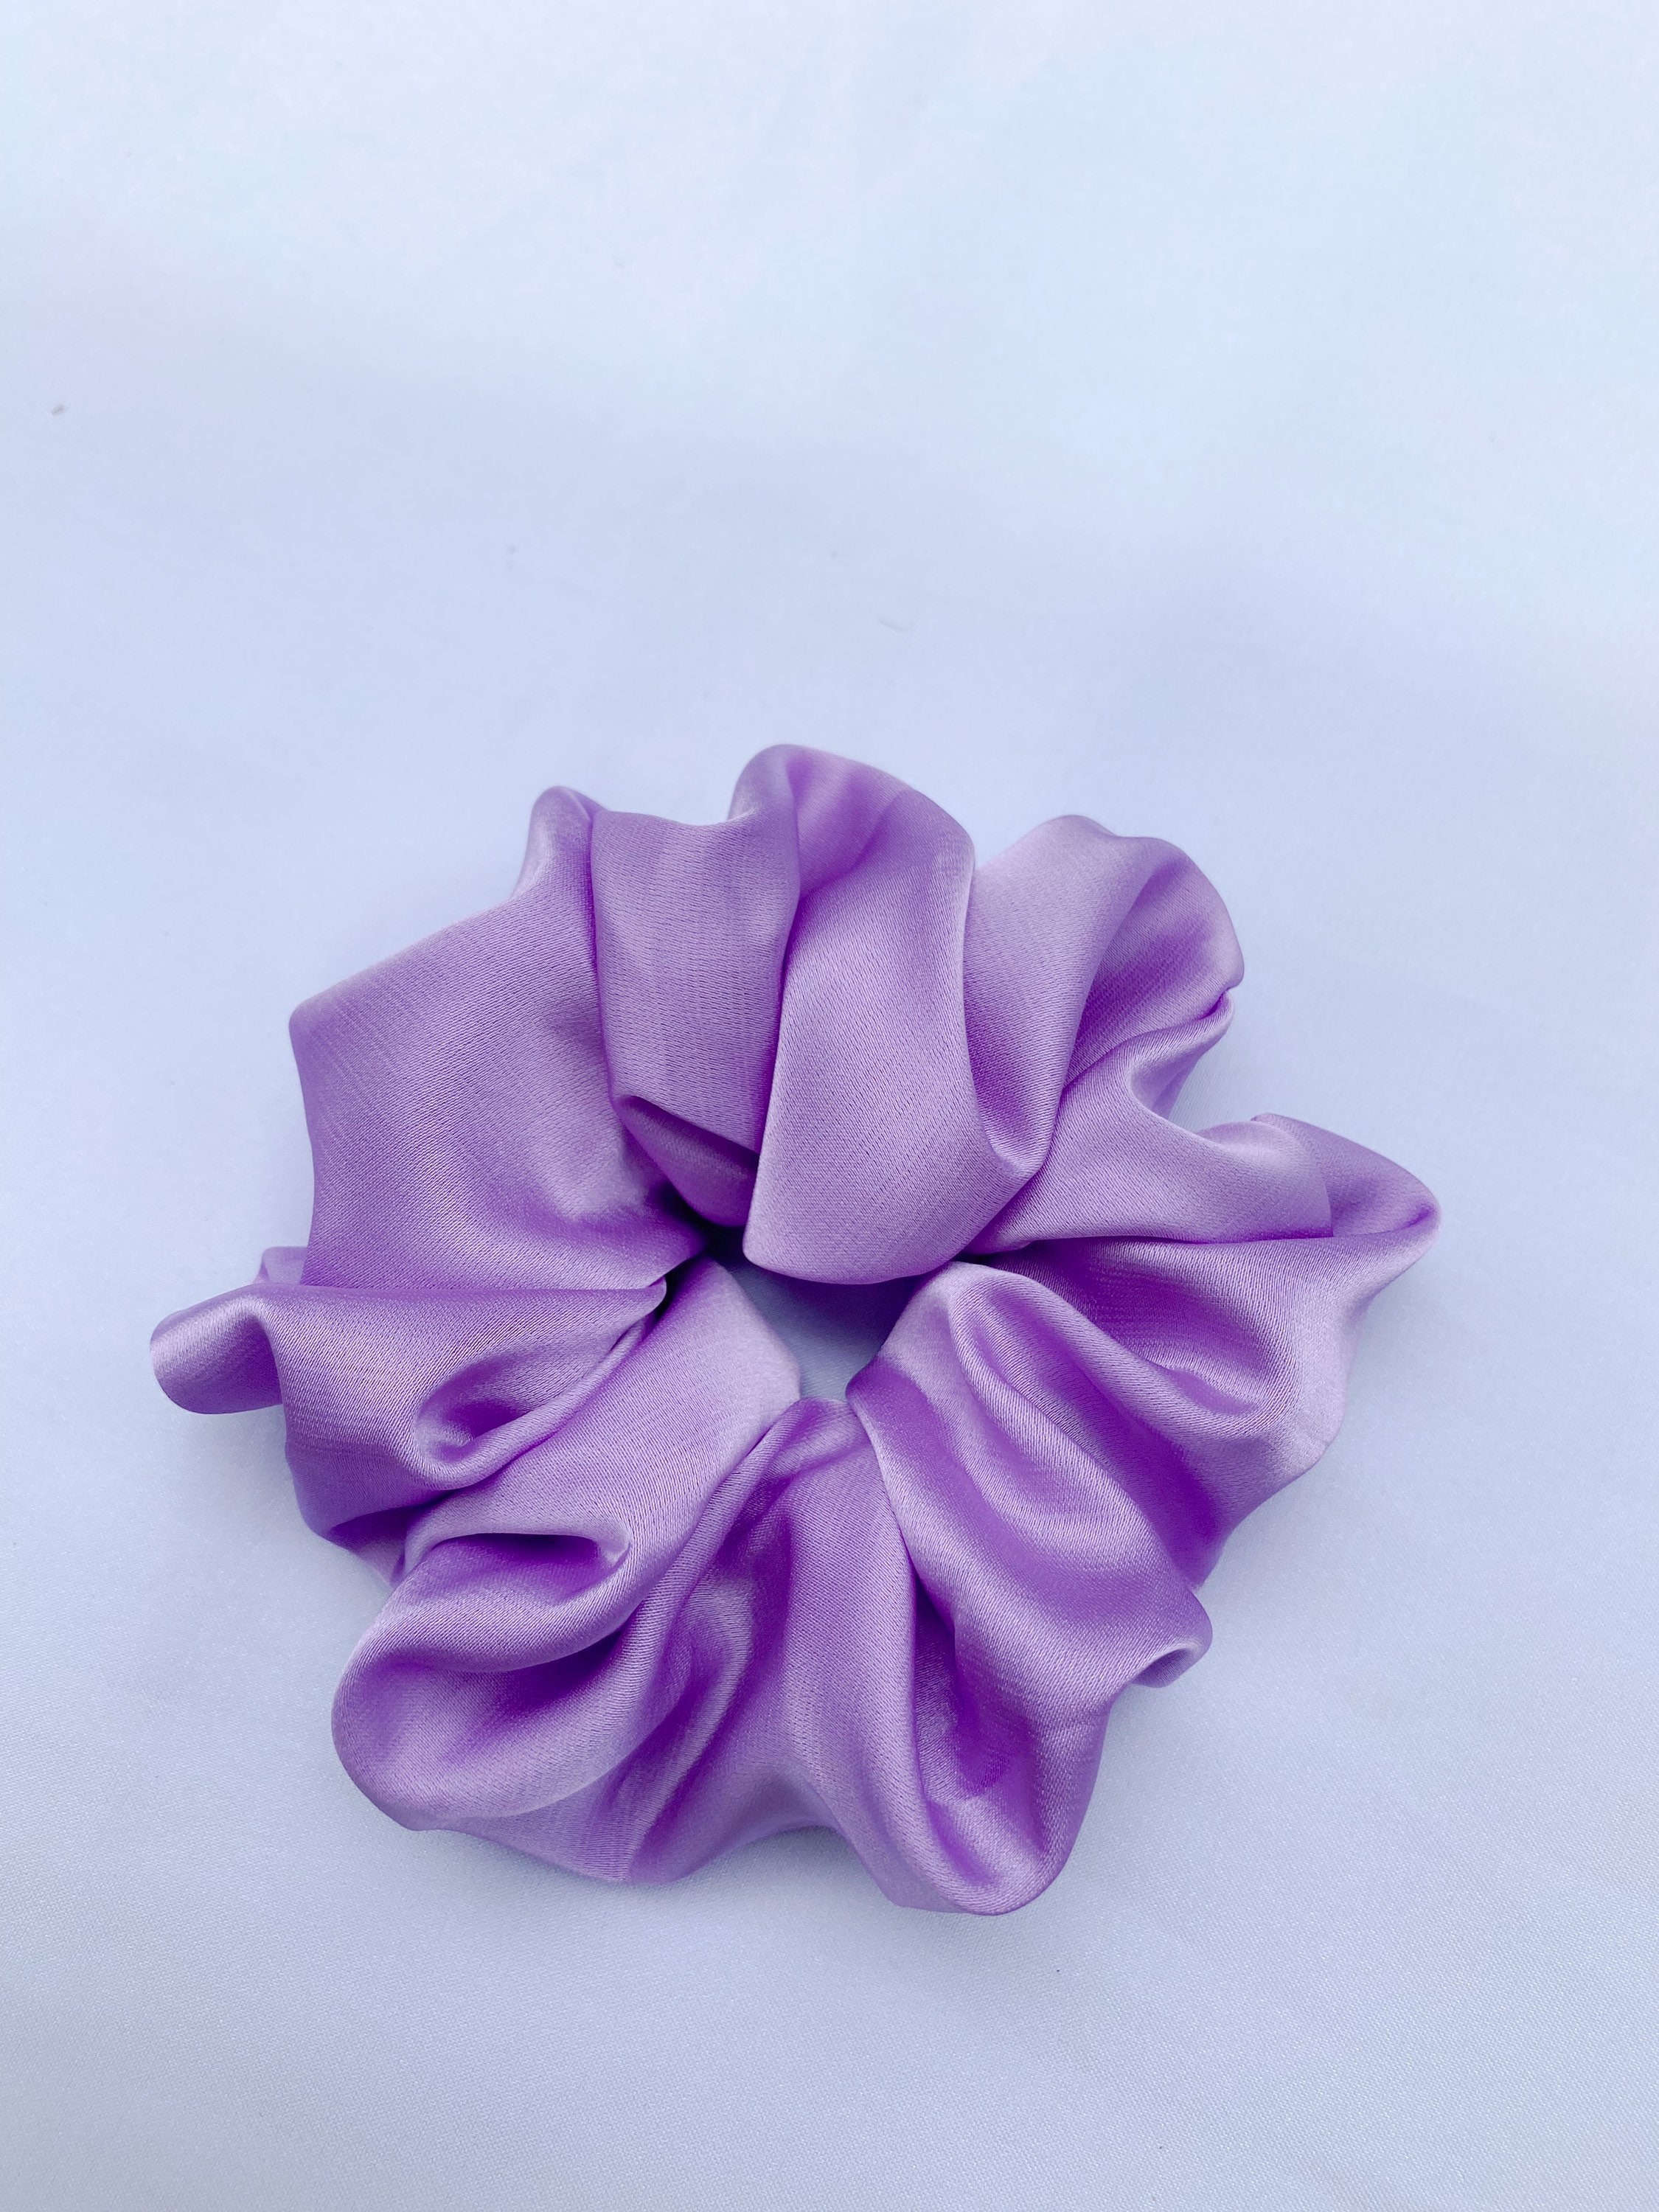 Mulberry silk scrunchies For her Hair tie Anti frizz Anti | Etsy